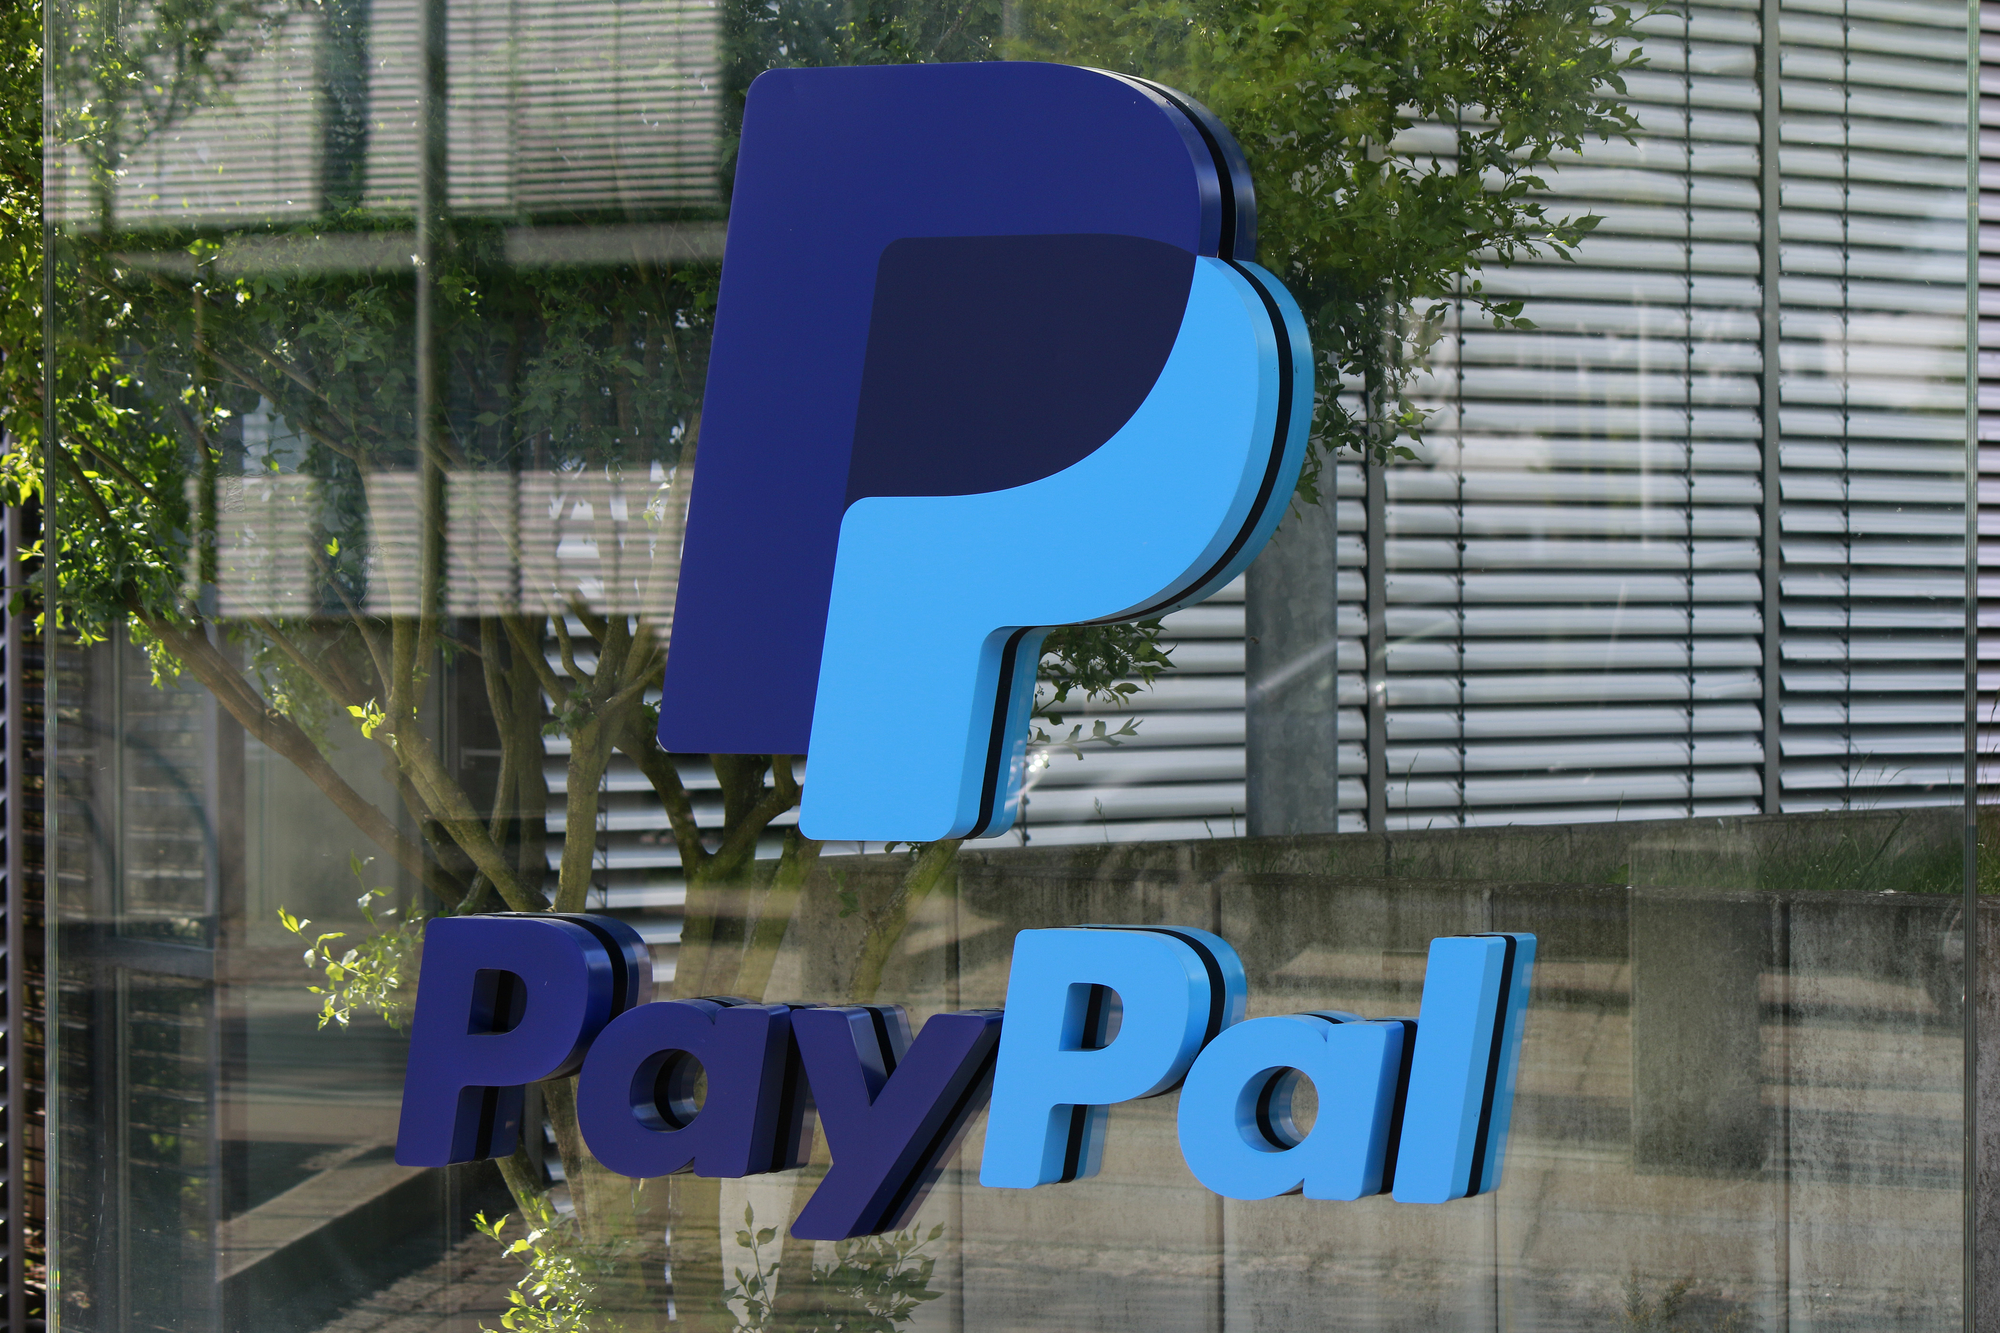 PayPal lays off 2,500 workers - a week after the announcement of a 